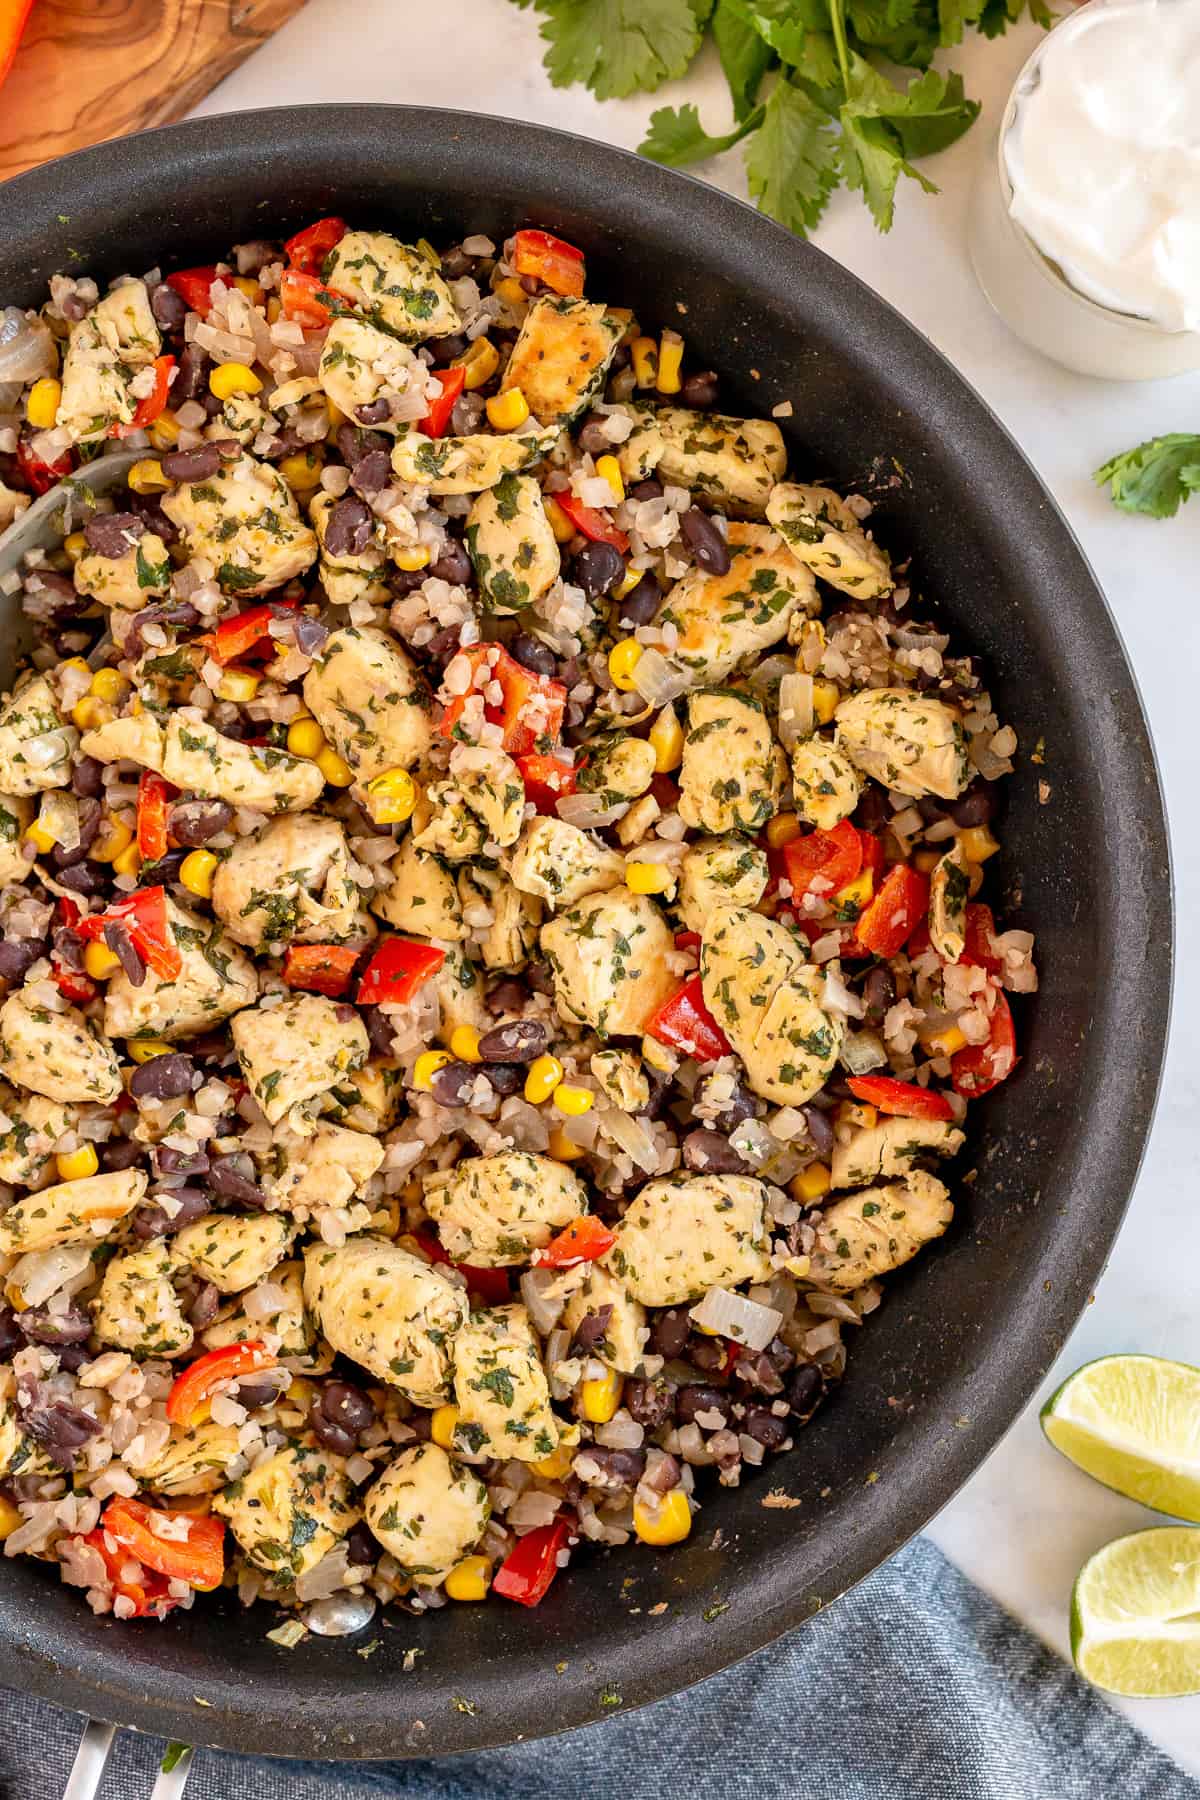 An over the top shot of a skillet filled with Cilantro Lime Chicken with Tex-Mex Cauliflower Rice.